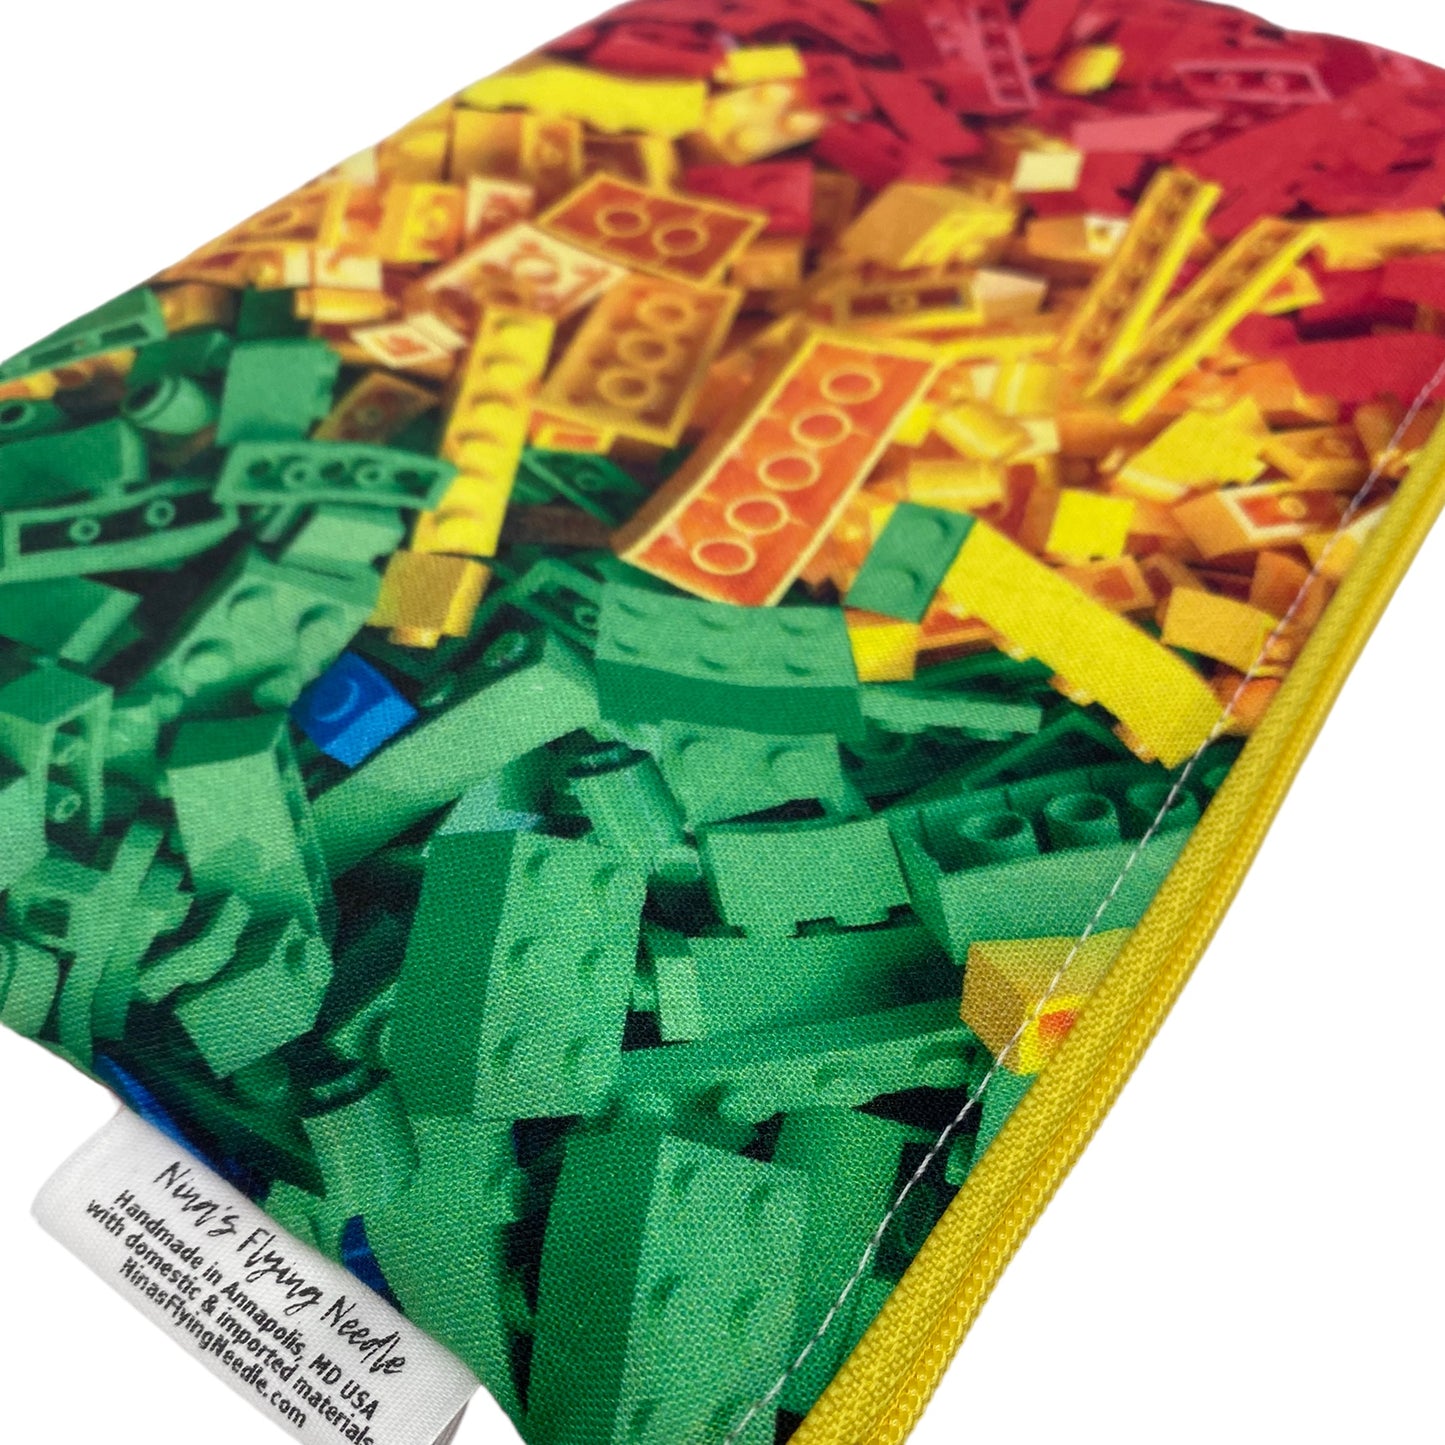 Snack Sized Reusable Zippered Bag Building Bricks Primary